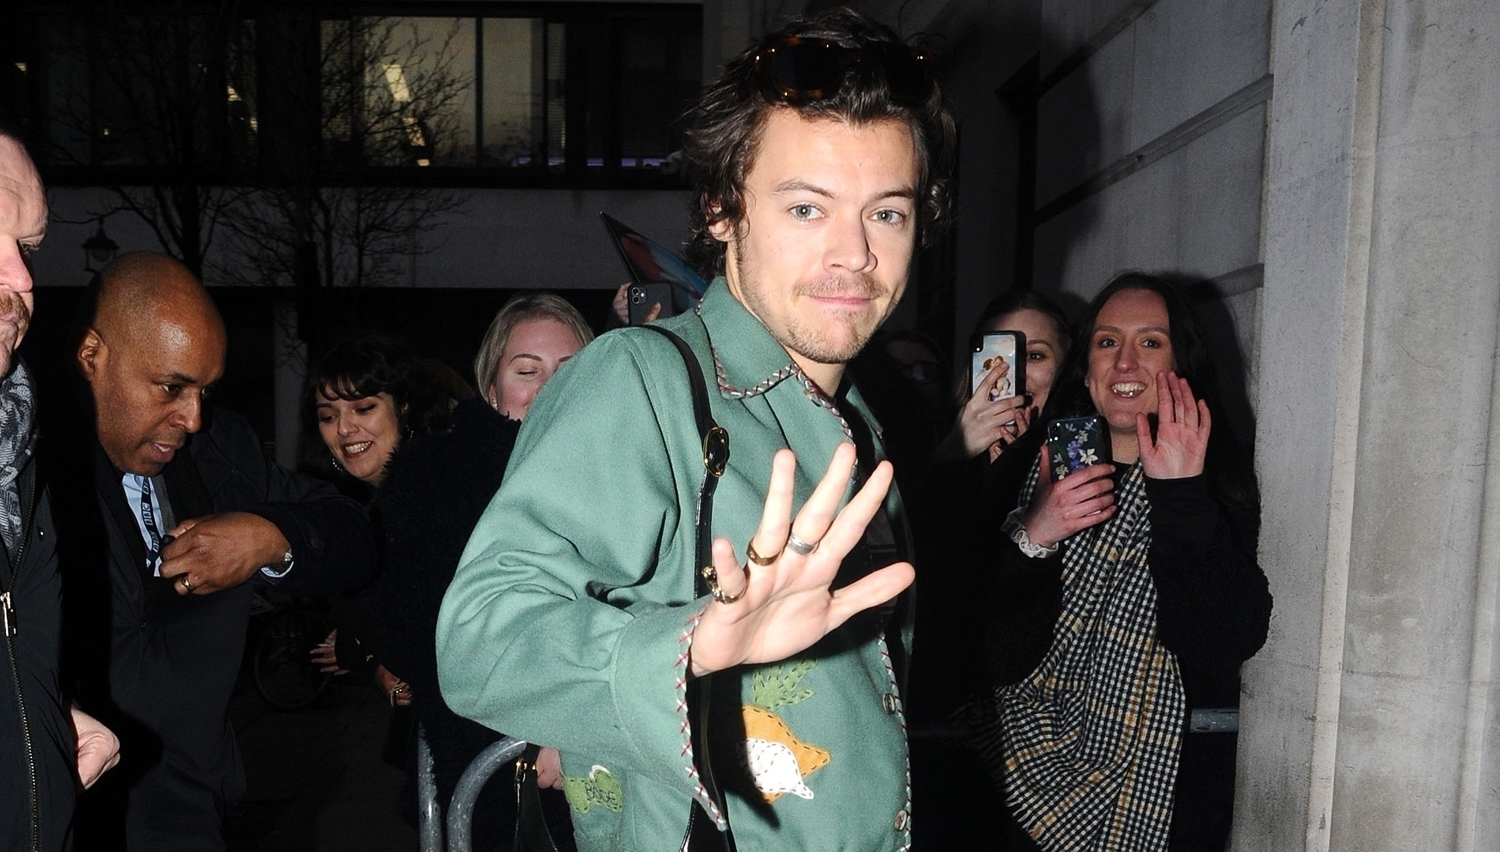 Harry Styles and Taylor Russell's Full Relationship Timeline